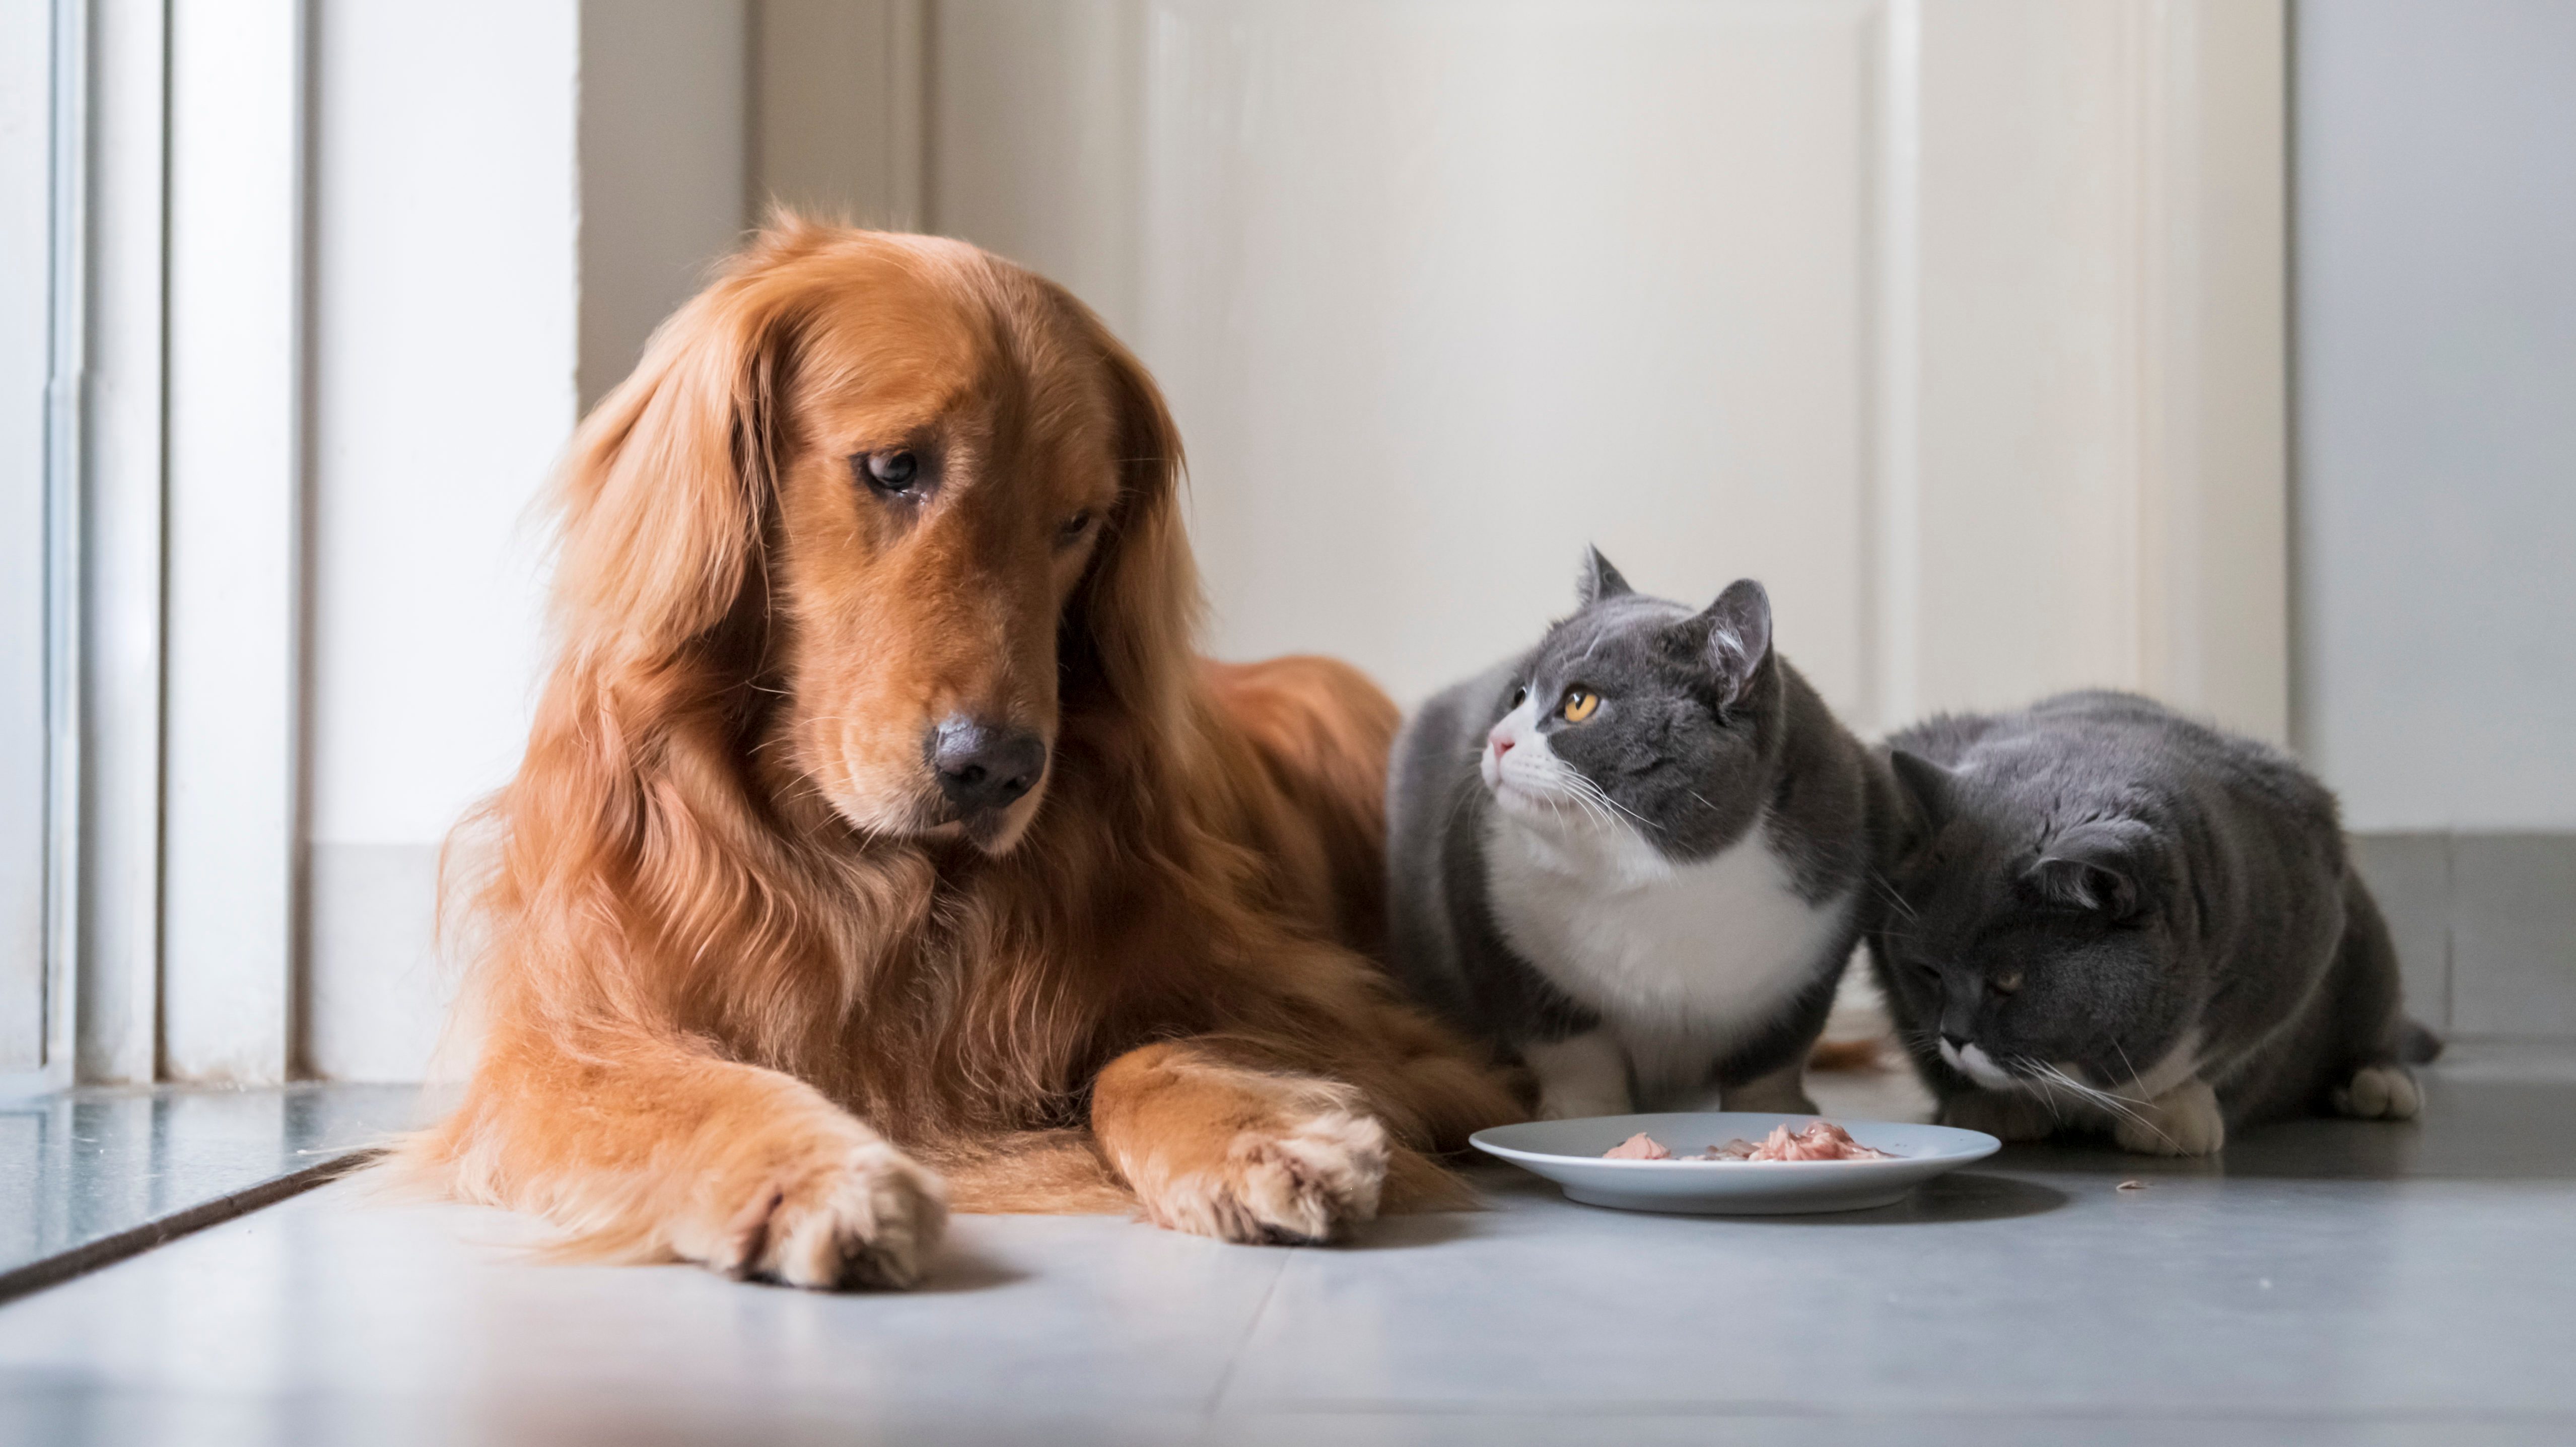 Can Dogs Eat Cat Food? Here's What to Do Reader's Digest